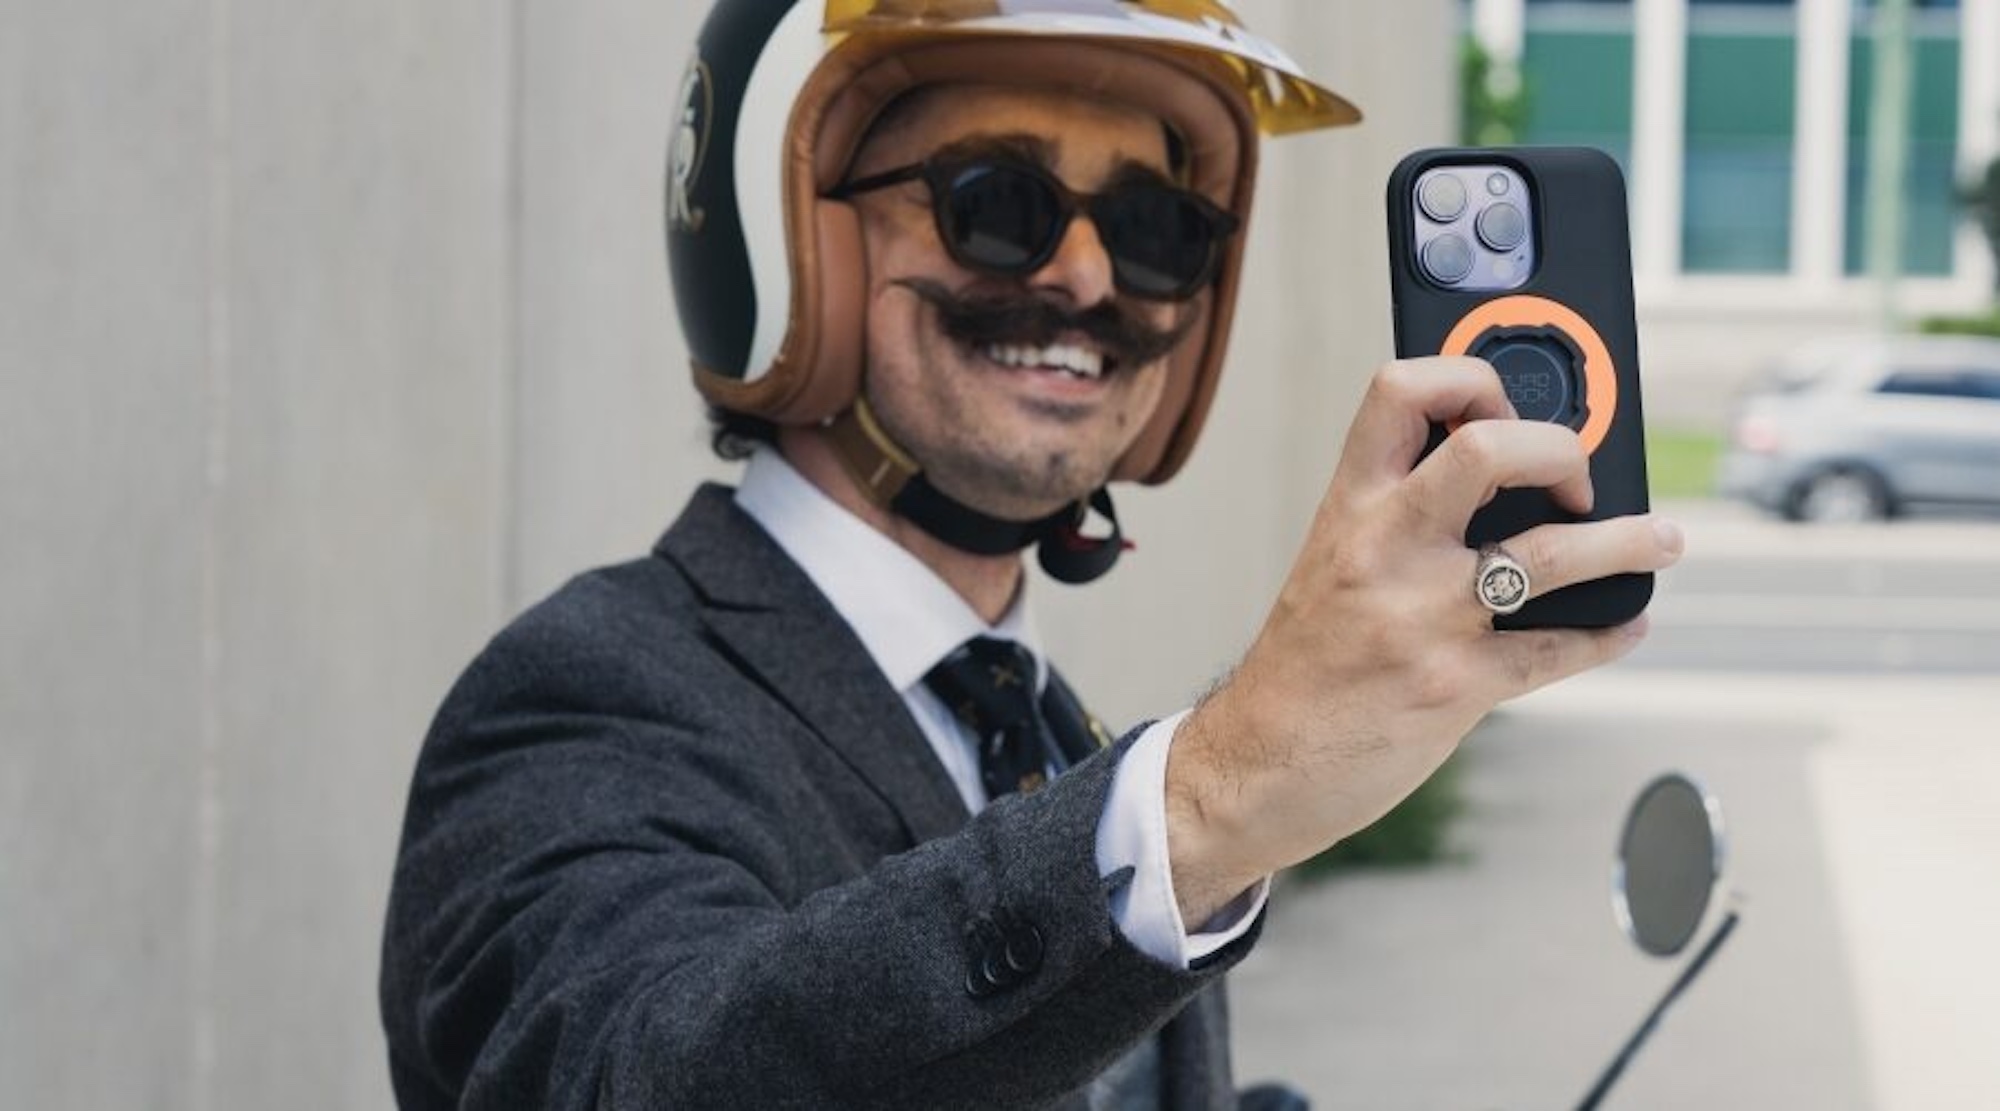 A ma with a moustache taking a selfie.